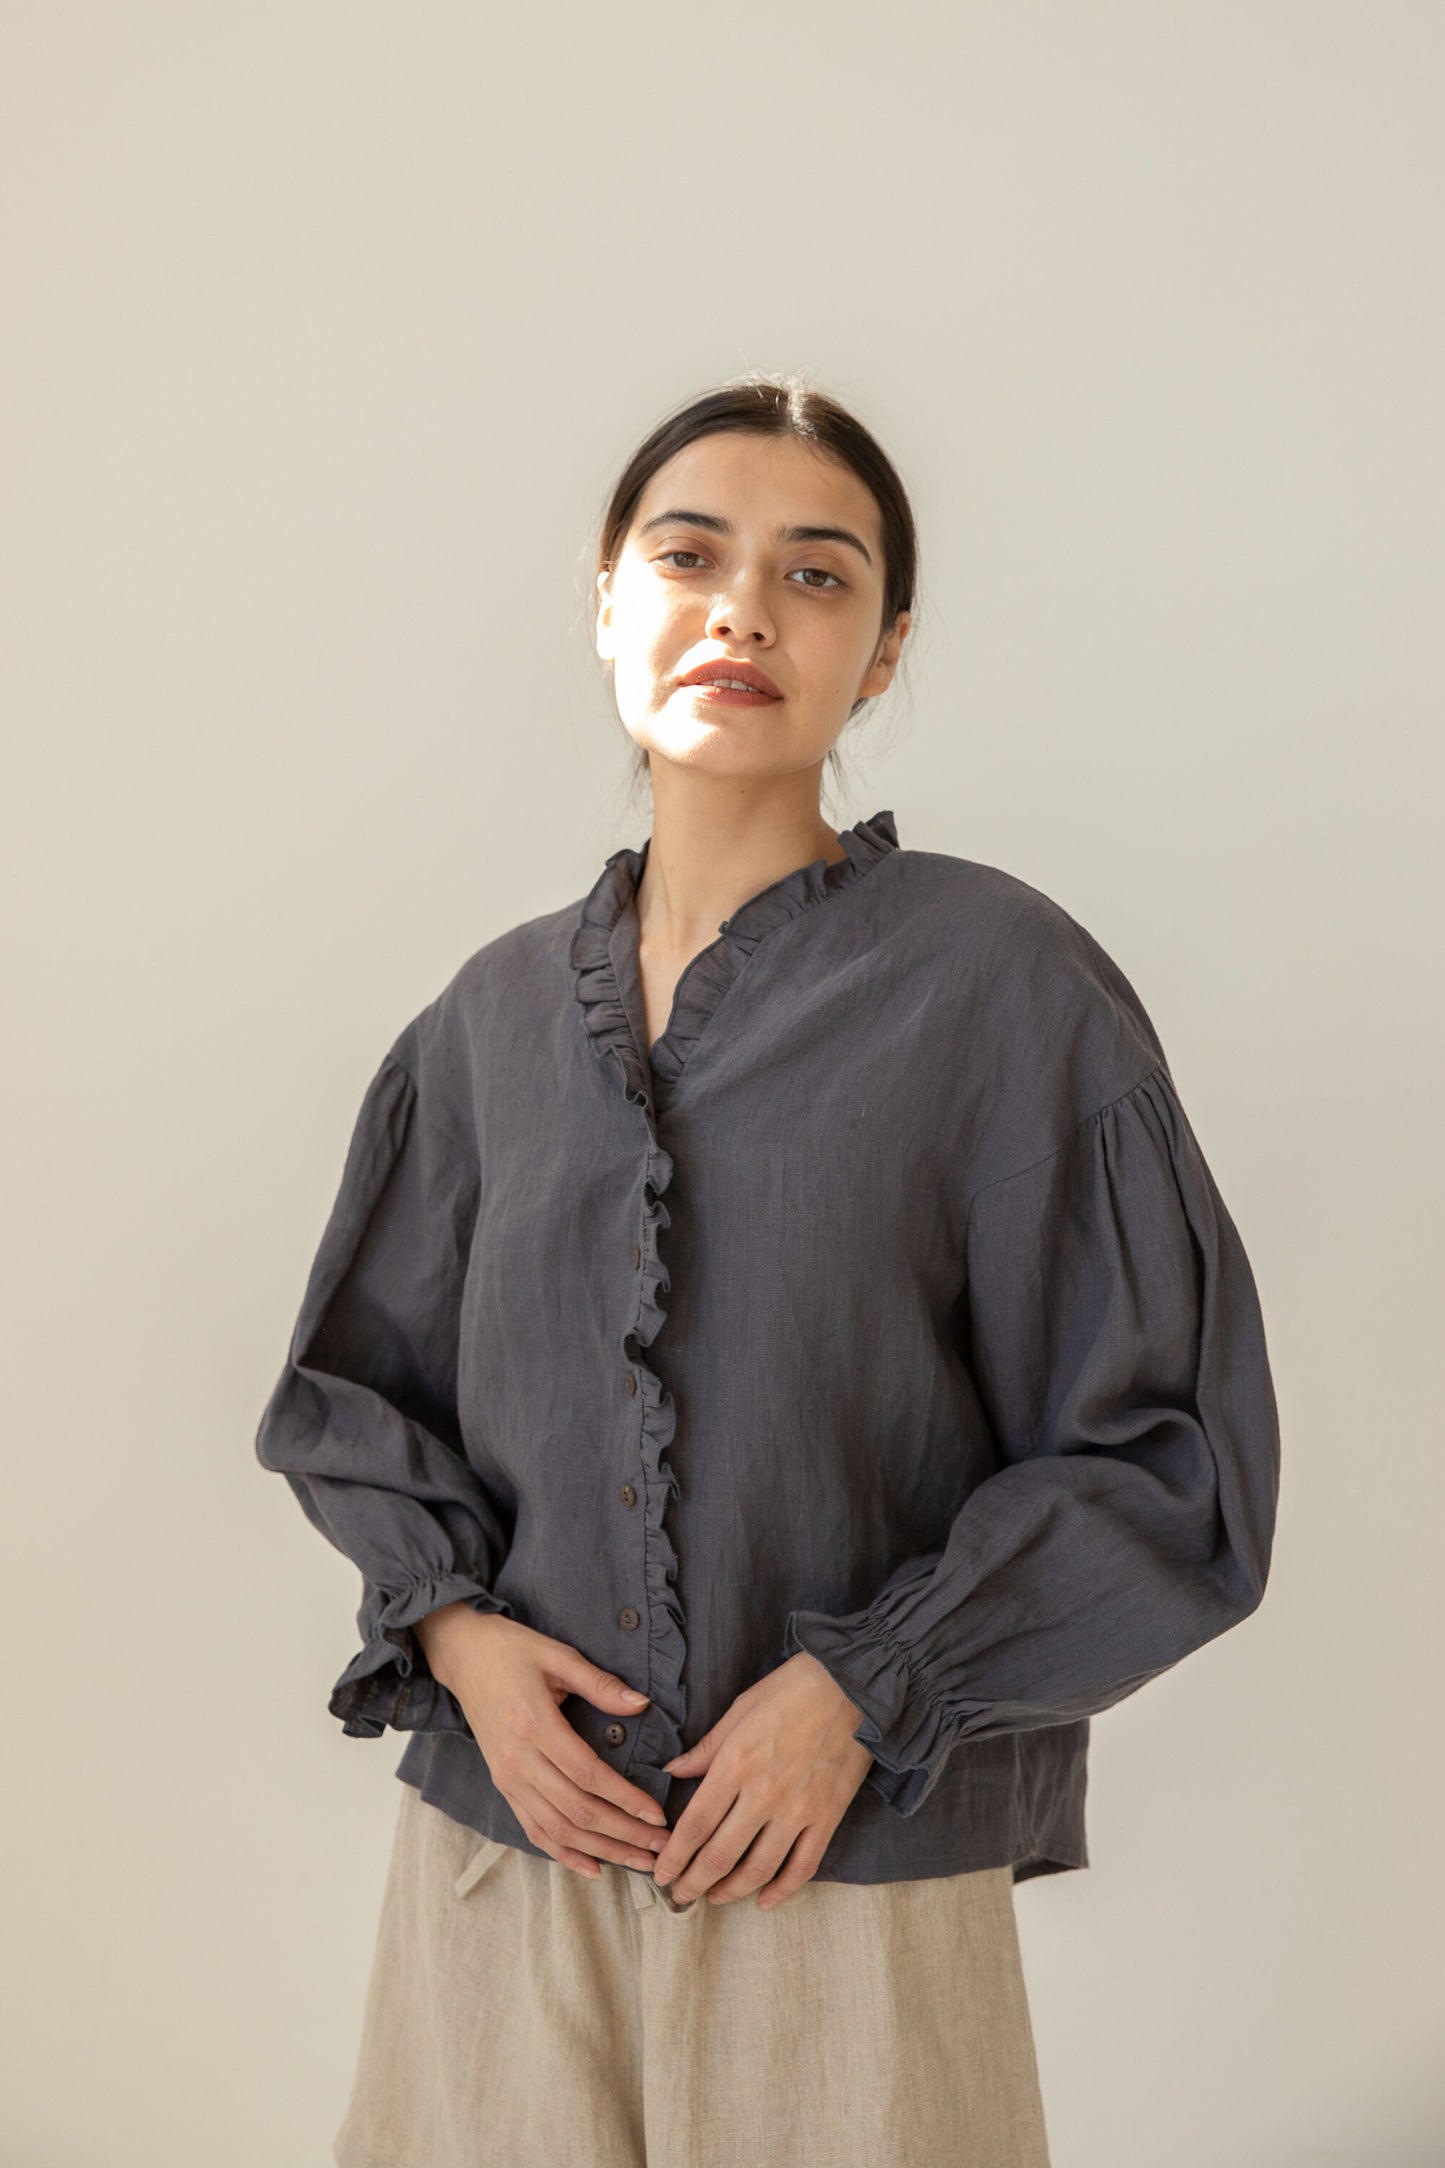 Tailored Linen Blouse perfect for both casual and formal occasions.